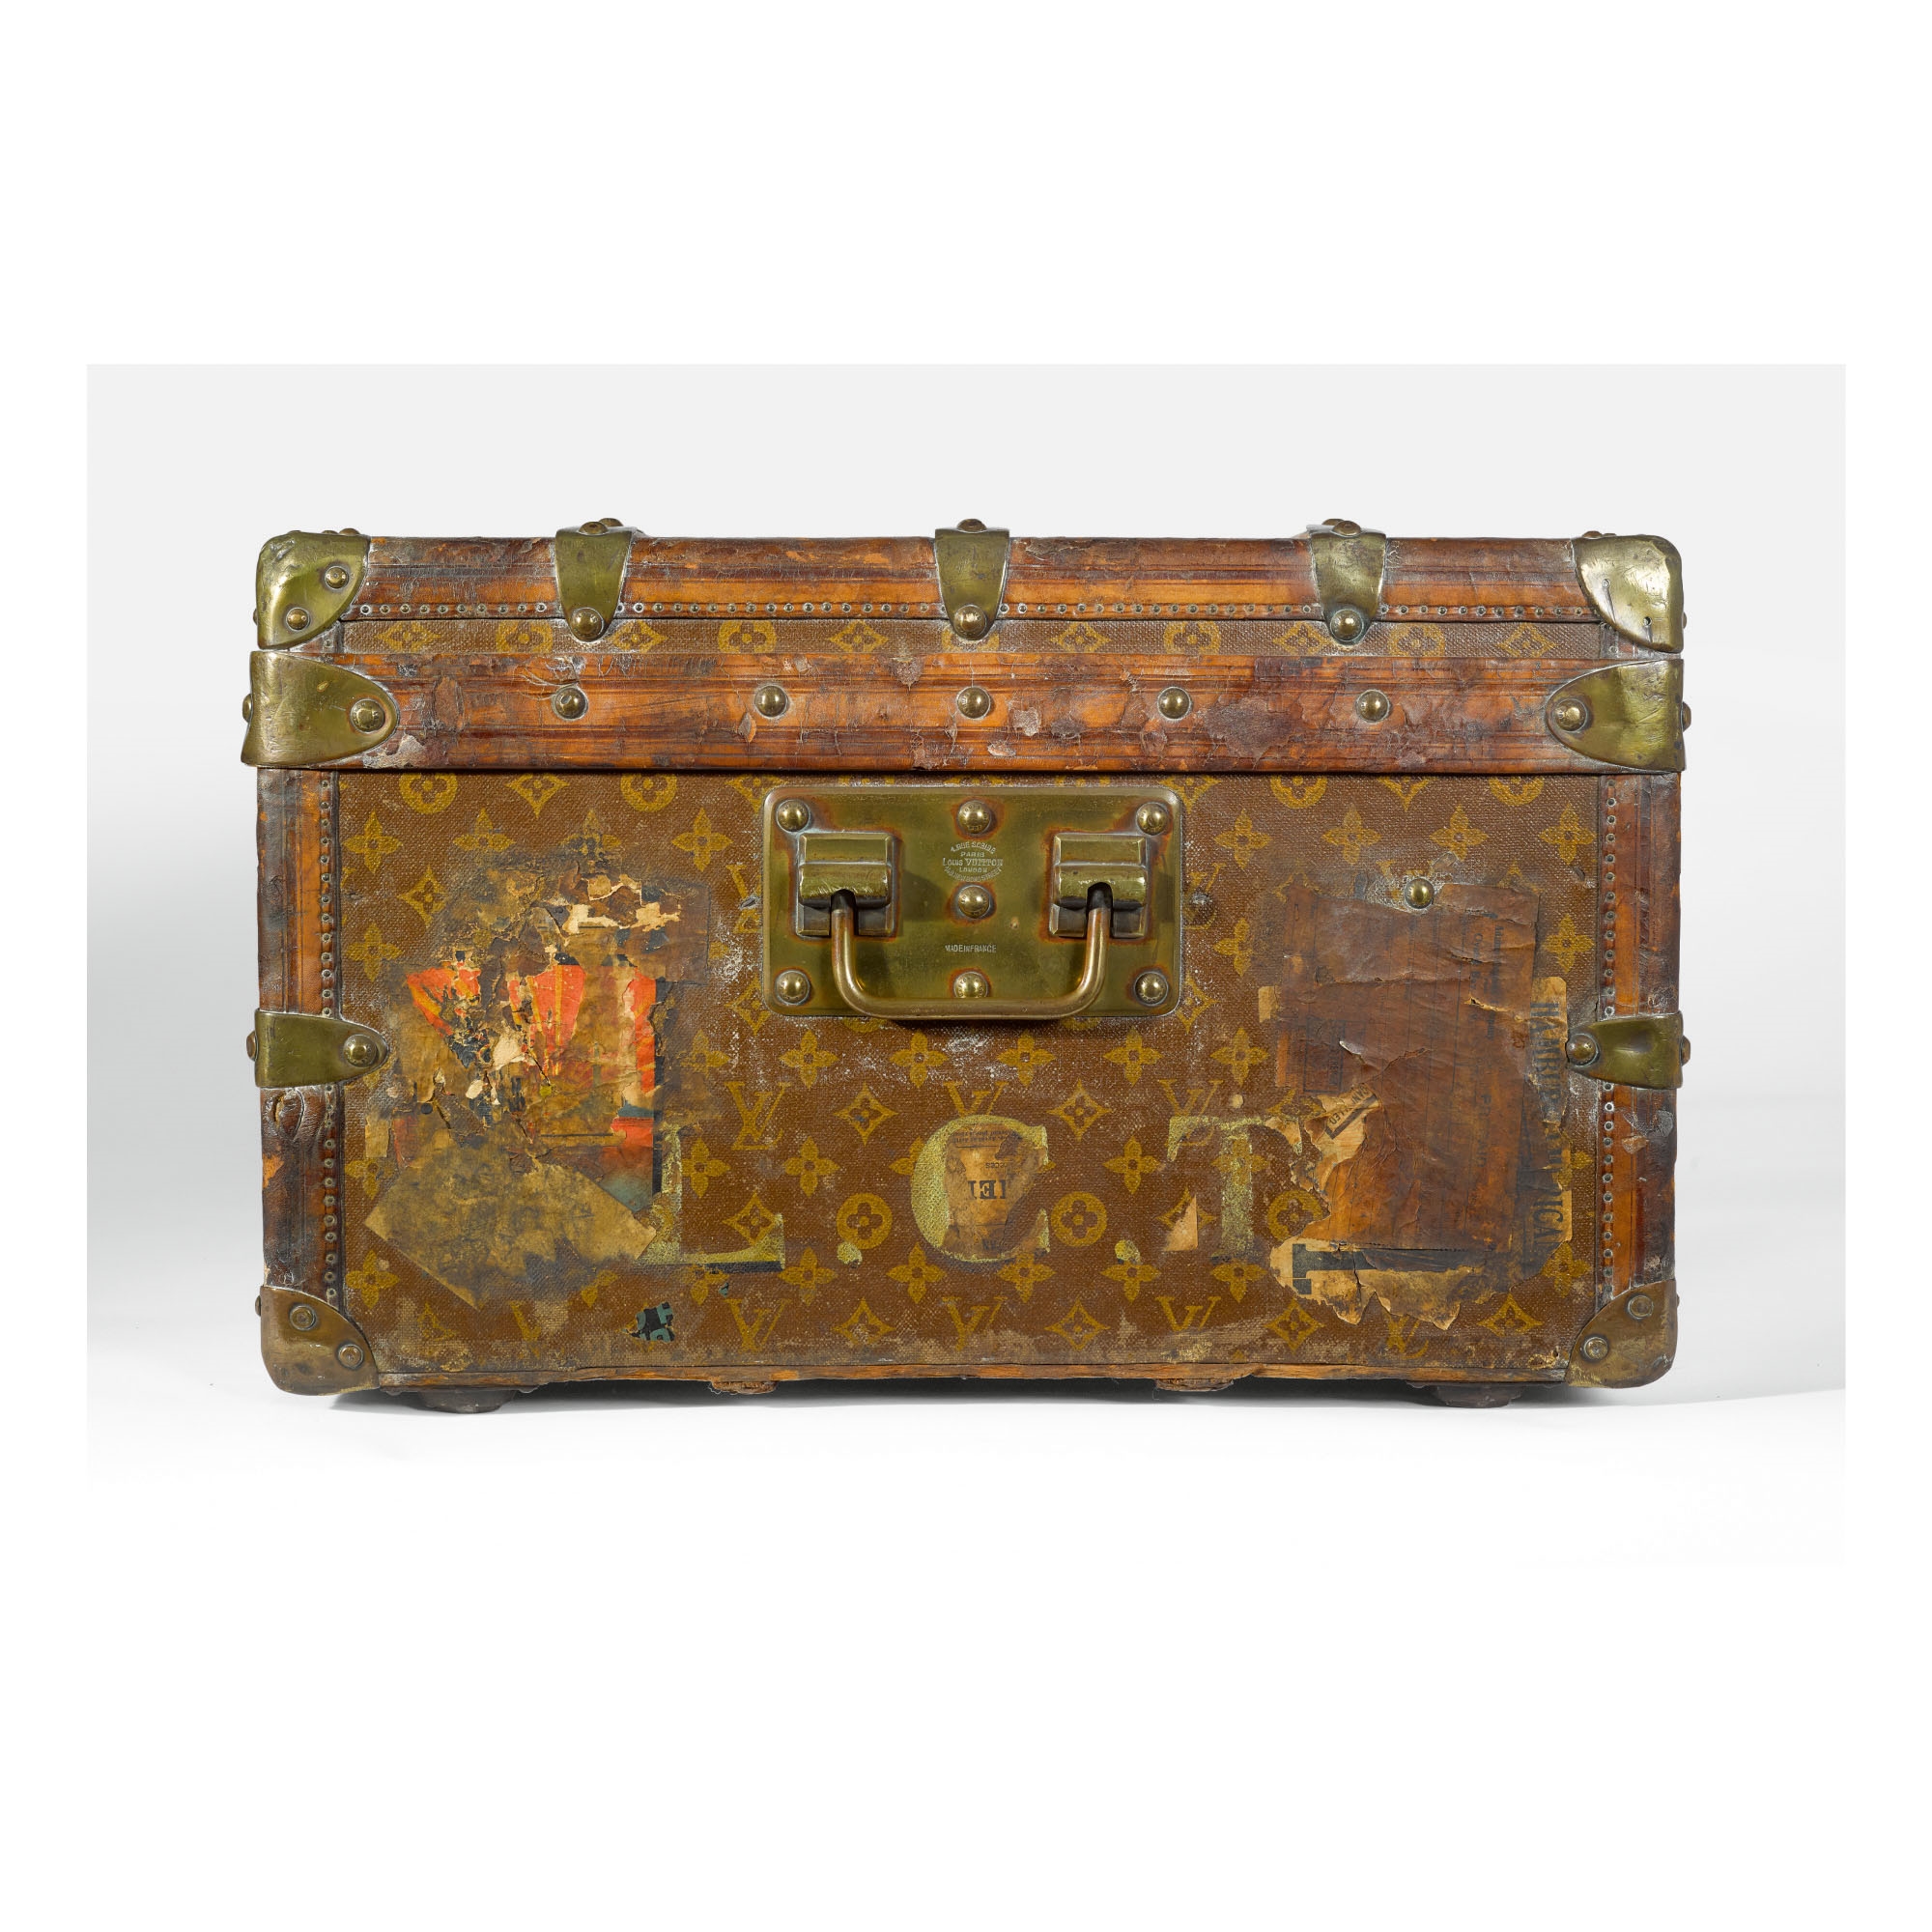 LOUIS VUITTON  STEAMER TRUNK POSSIBLY FROM THE